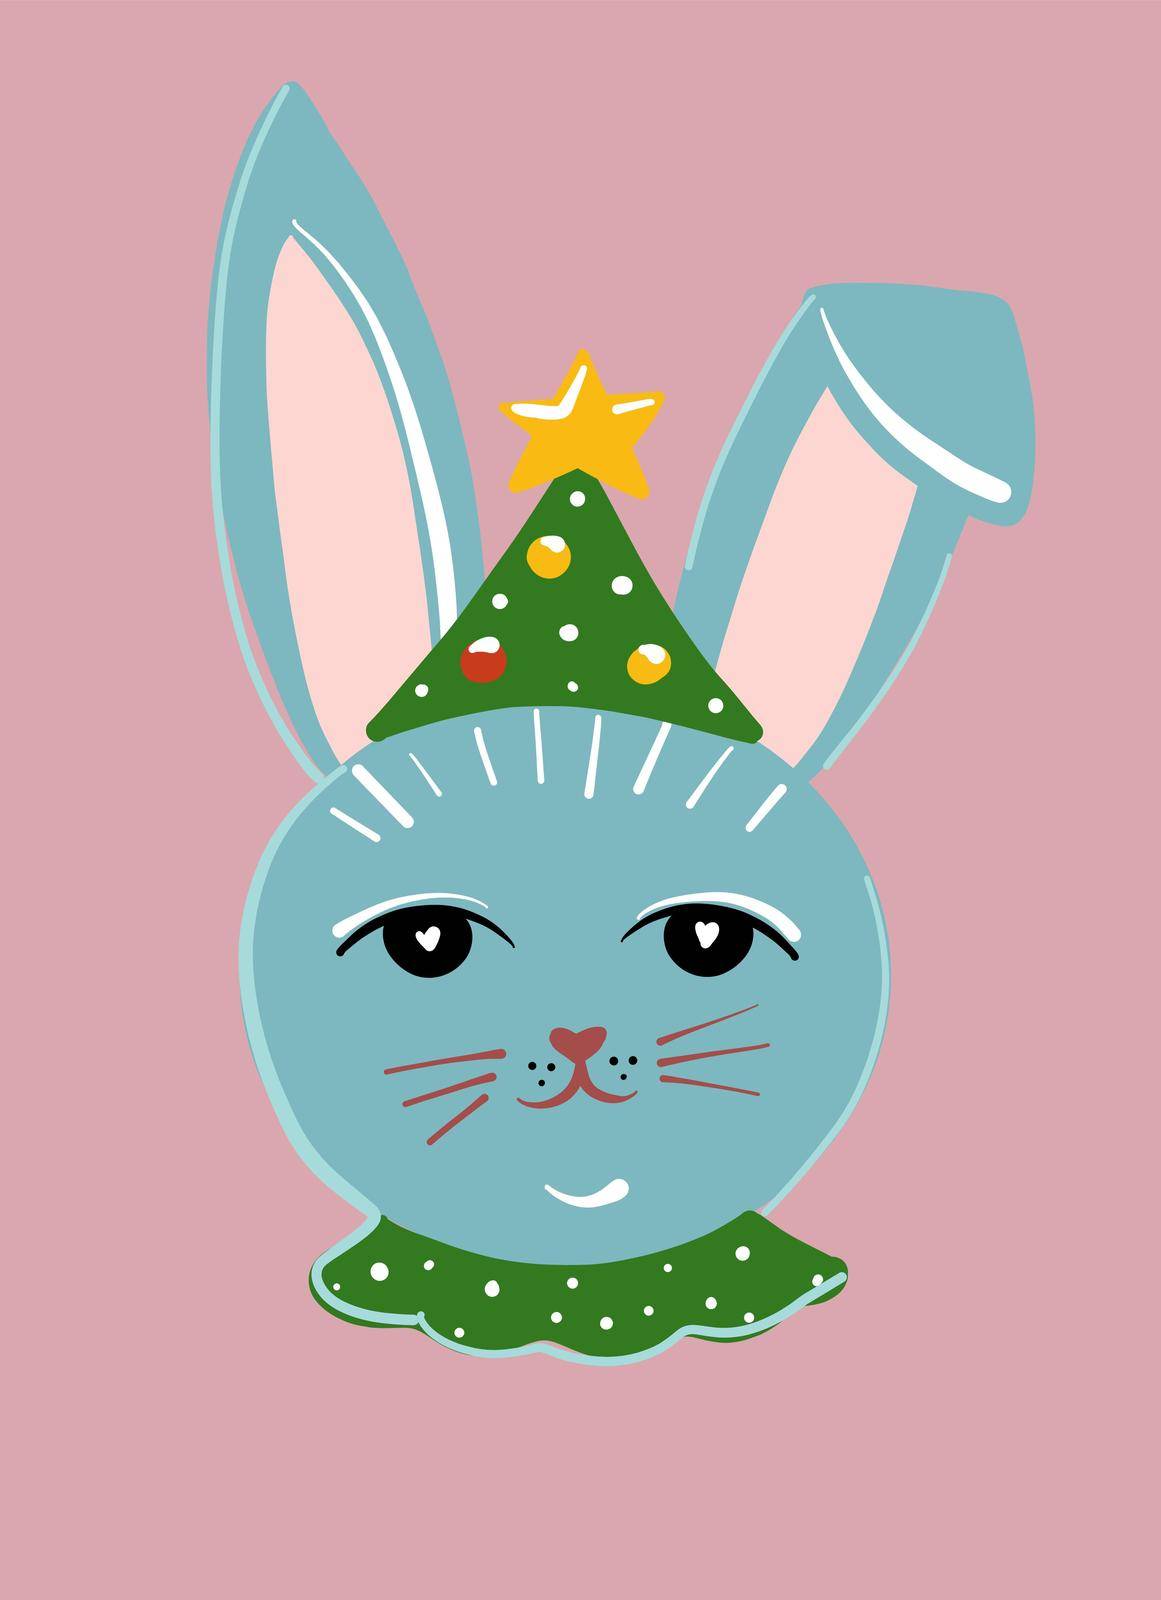 Cute blue rabbit in a festive hat. He s a Christmas tree. The head of a rabbit in the cartoon style. by Manka